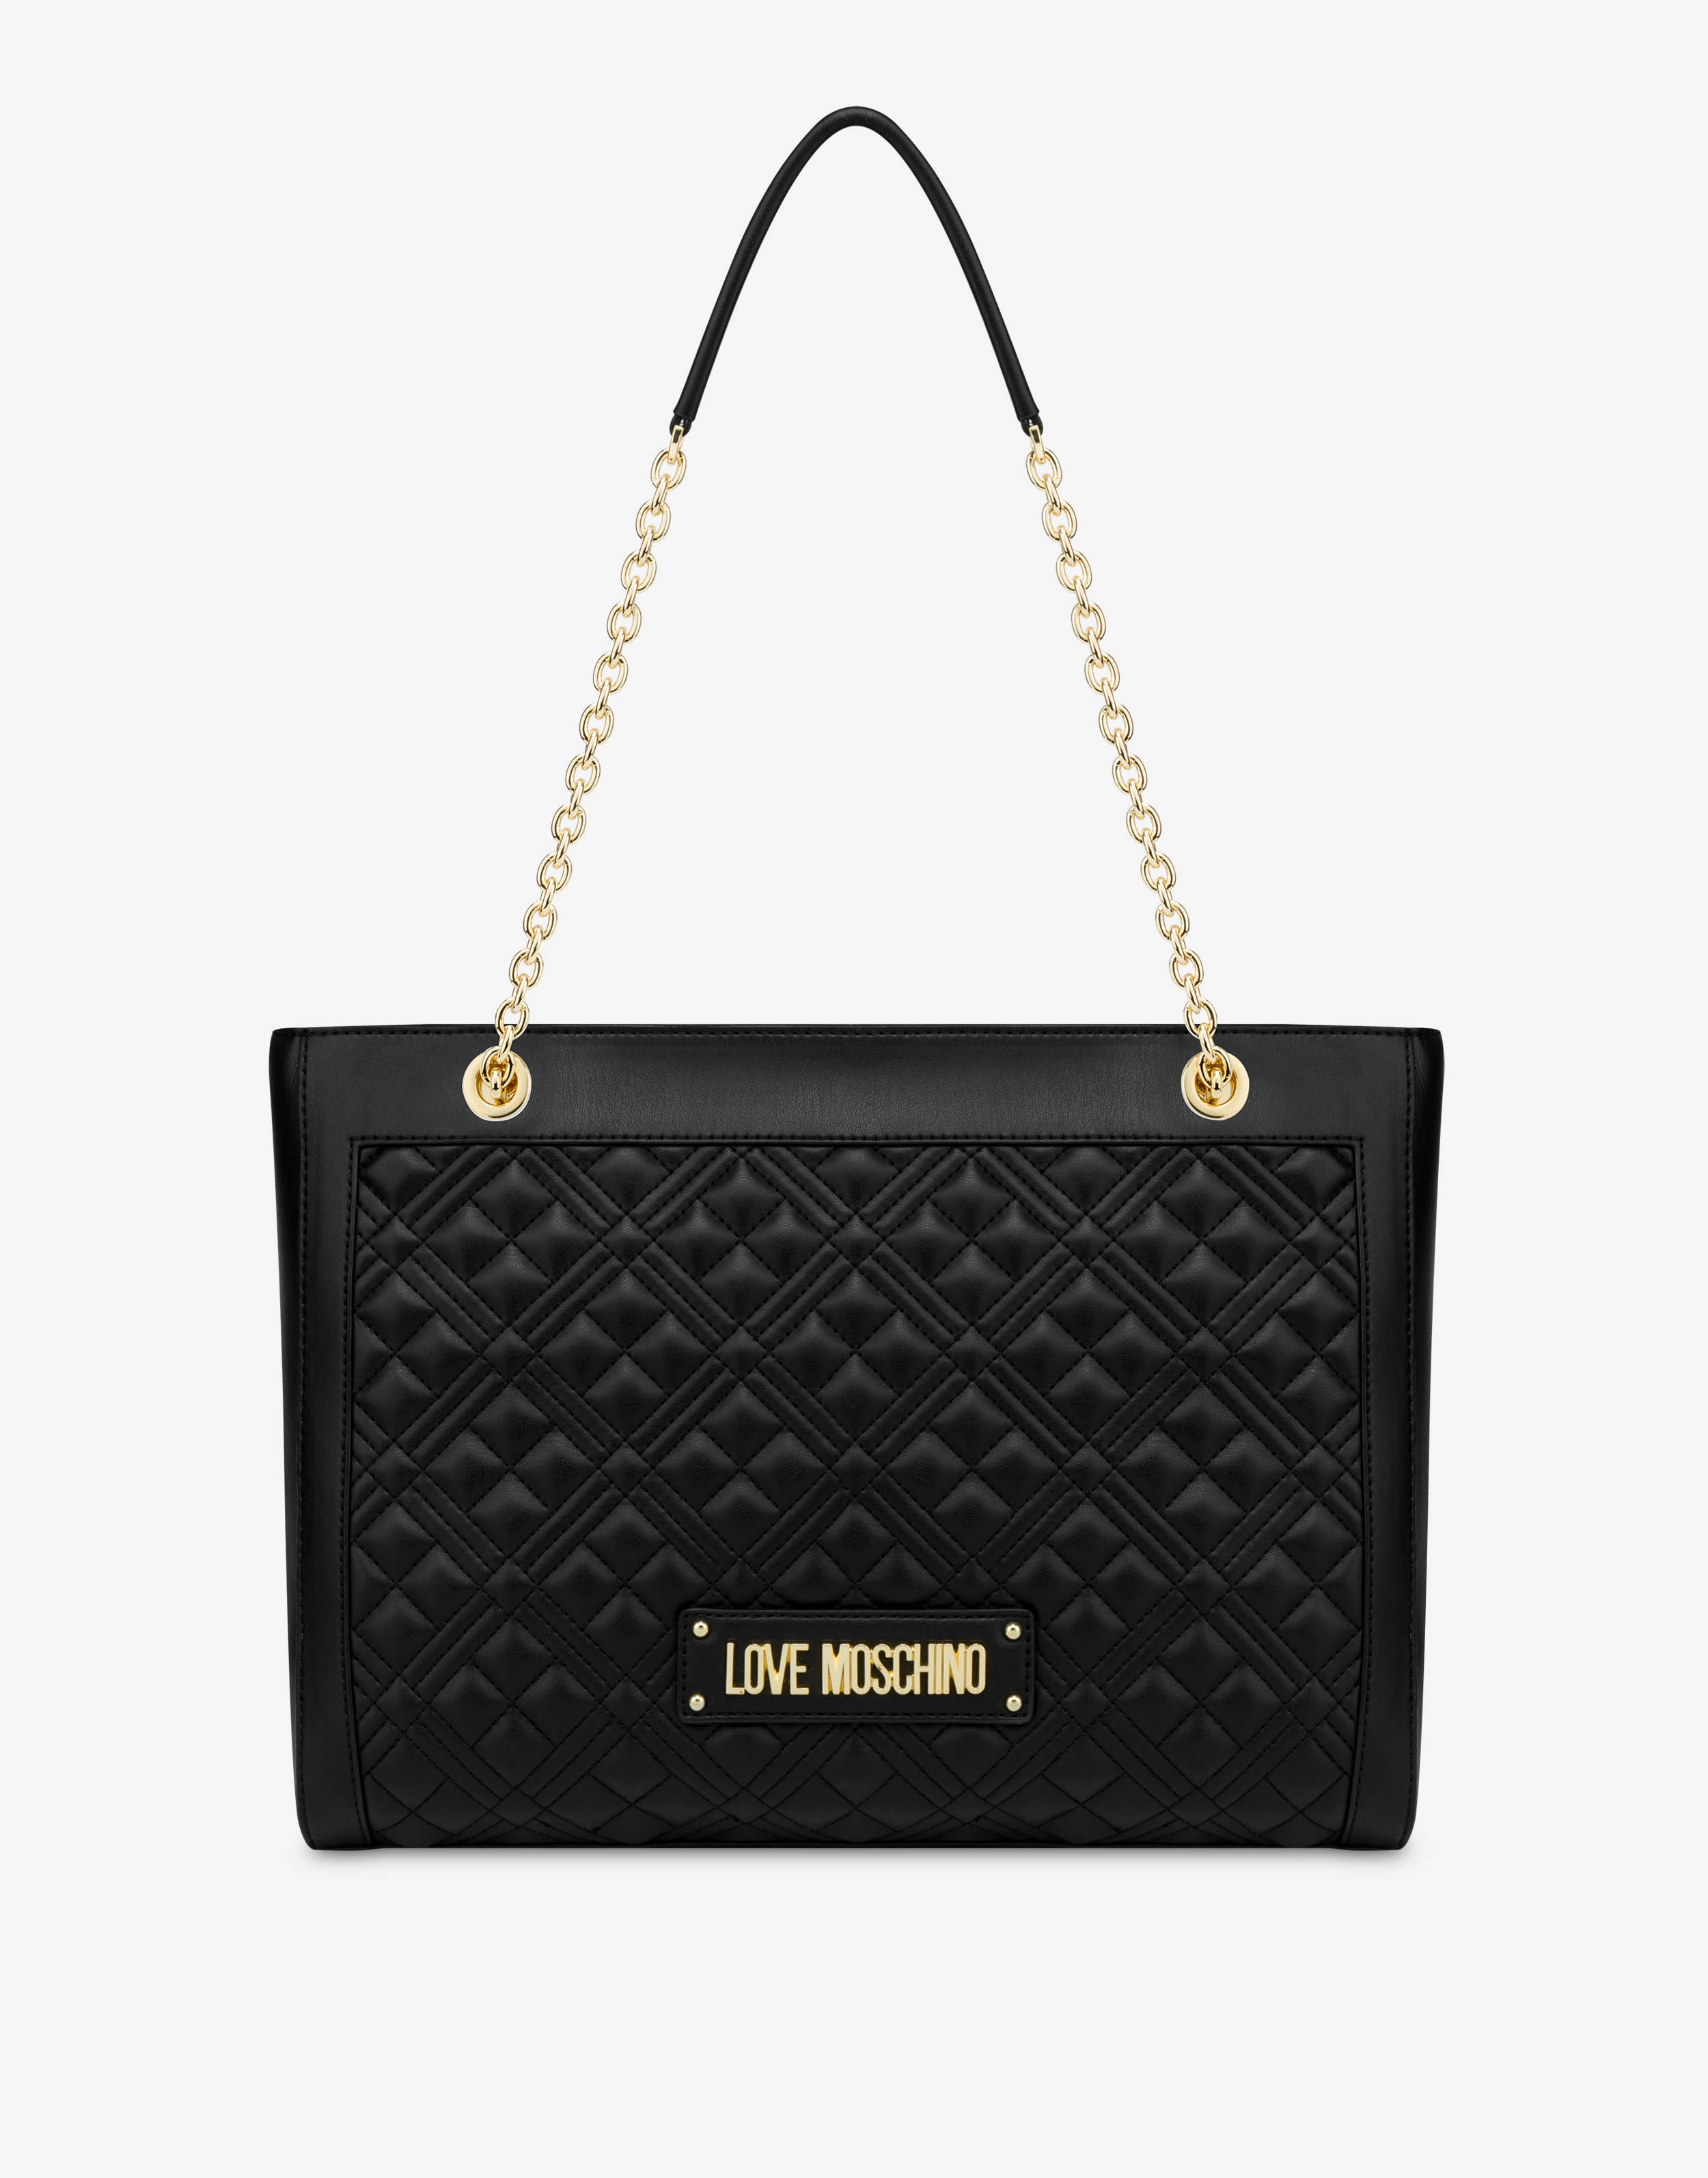 Baby Heart shoulder bag | Moschino Official Store